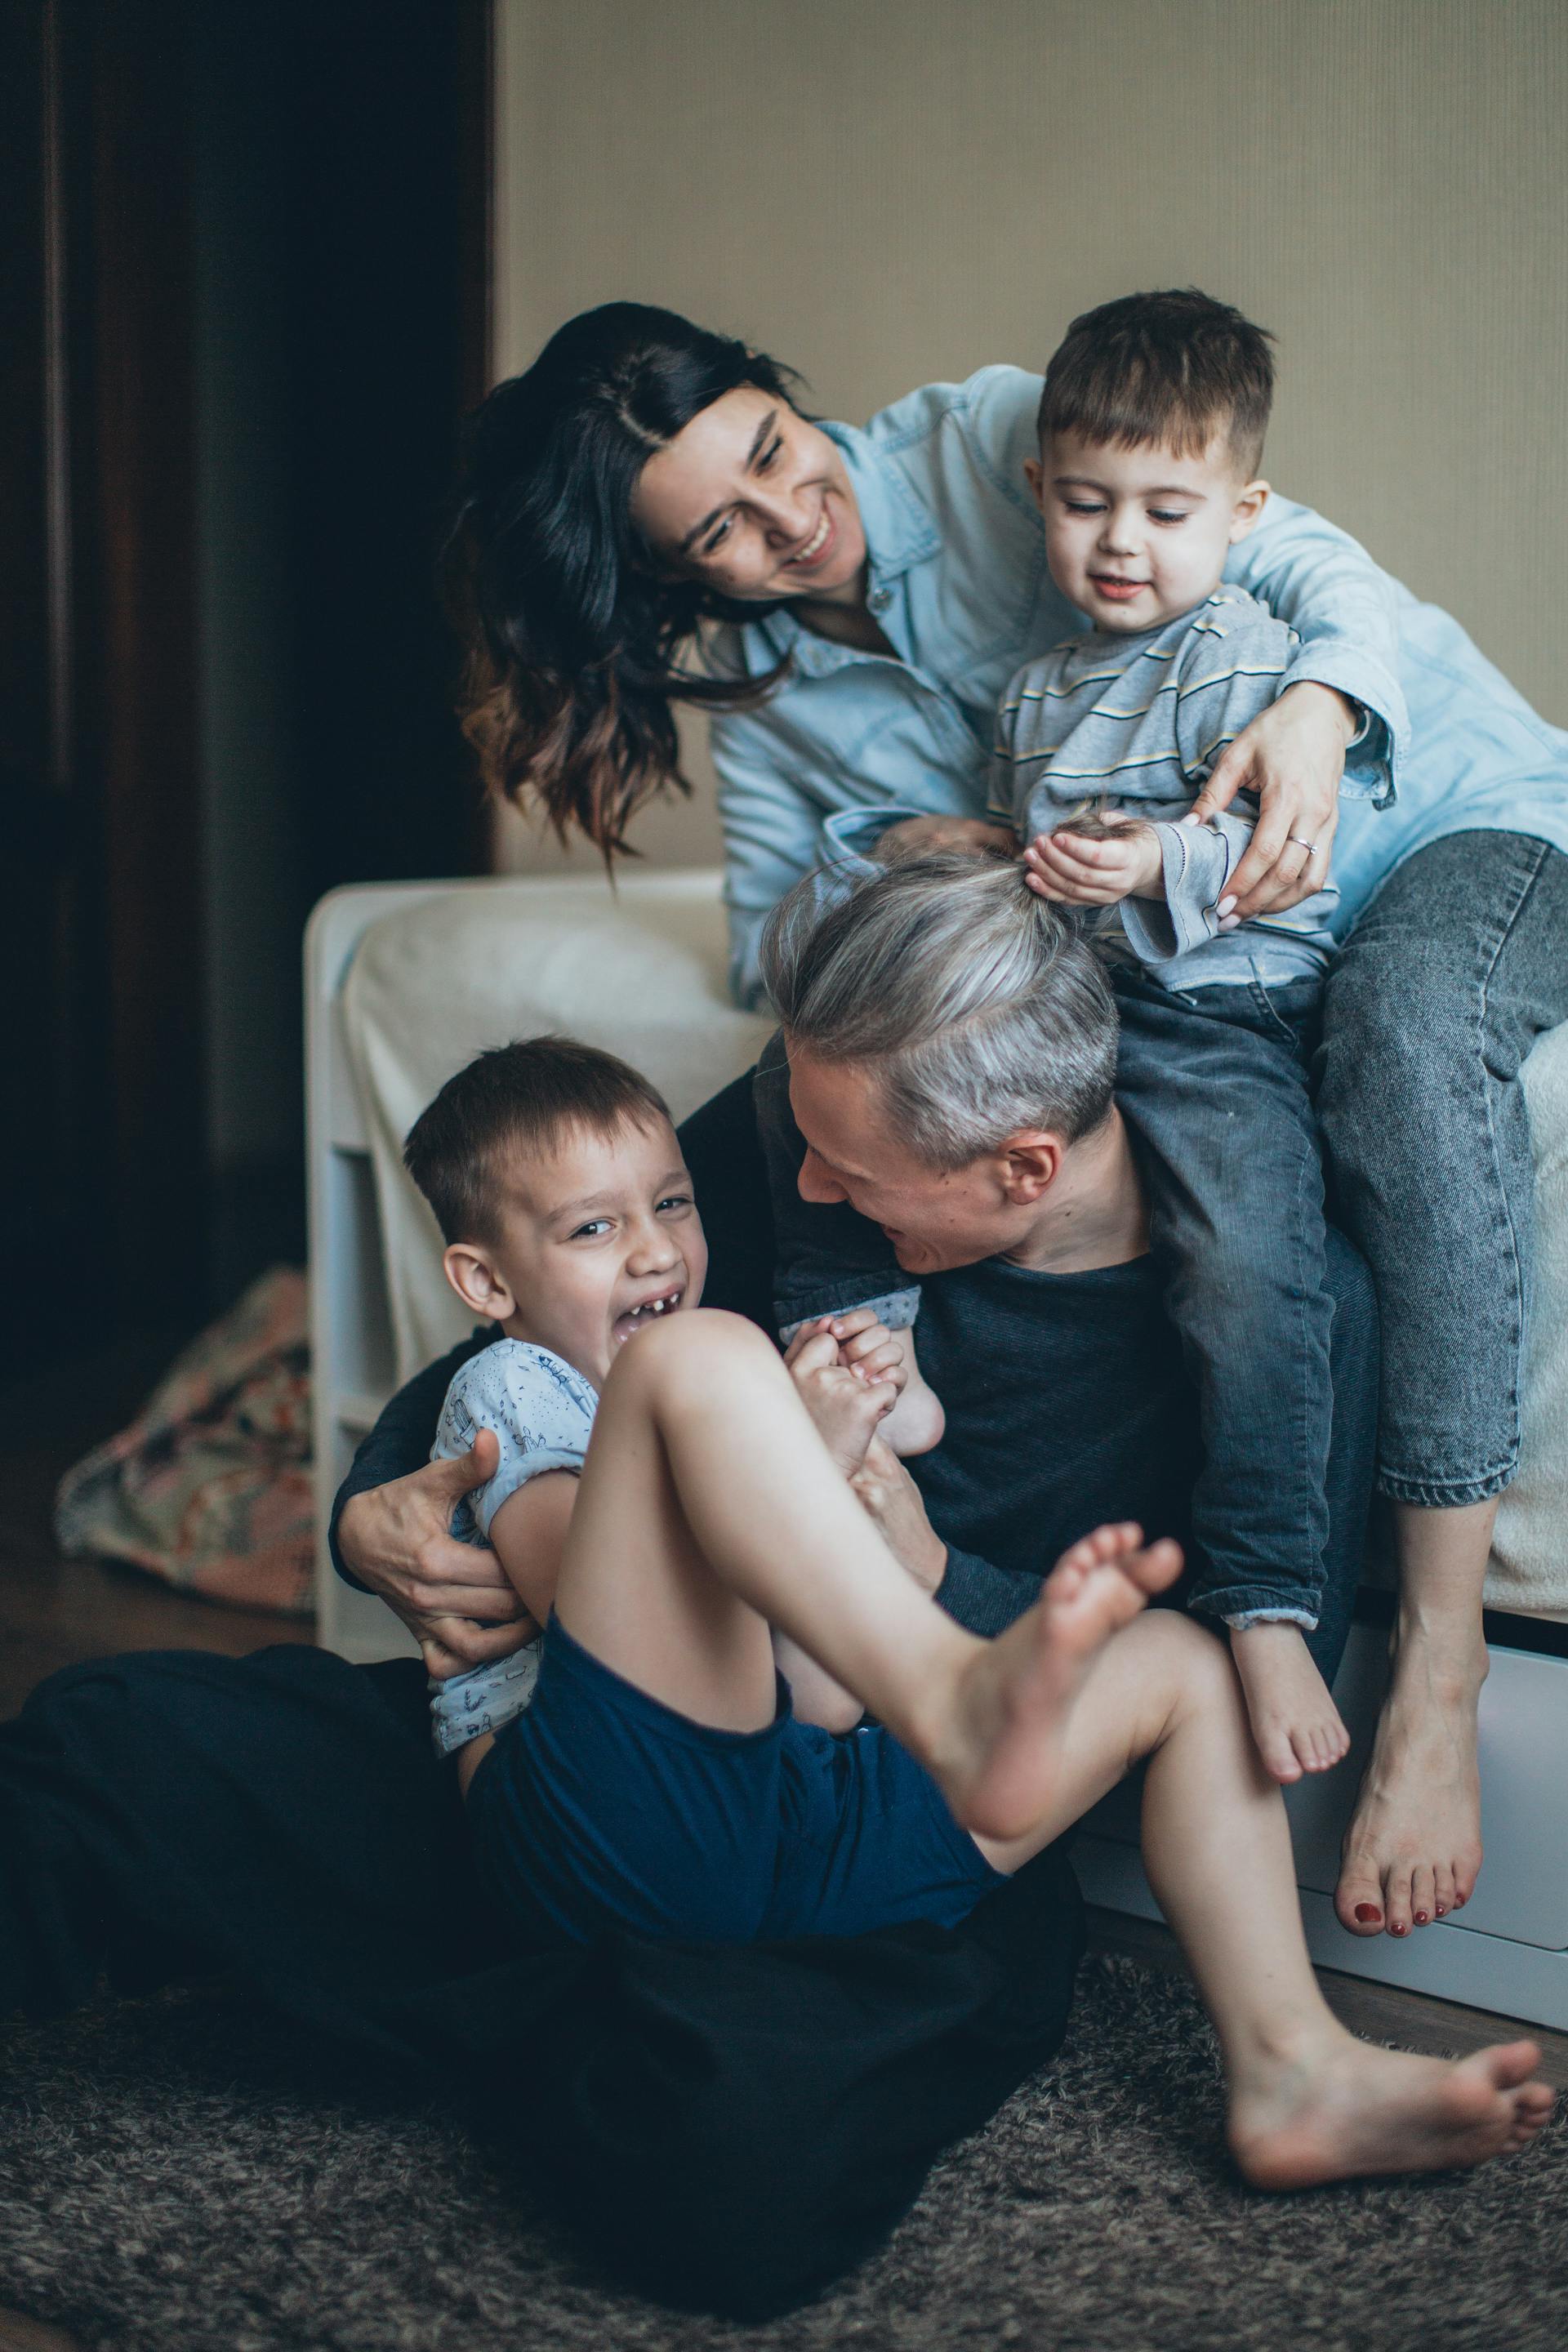 Parents playing with their two sons | Source: Pexels